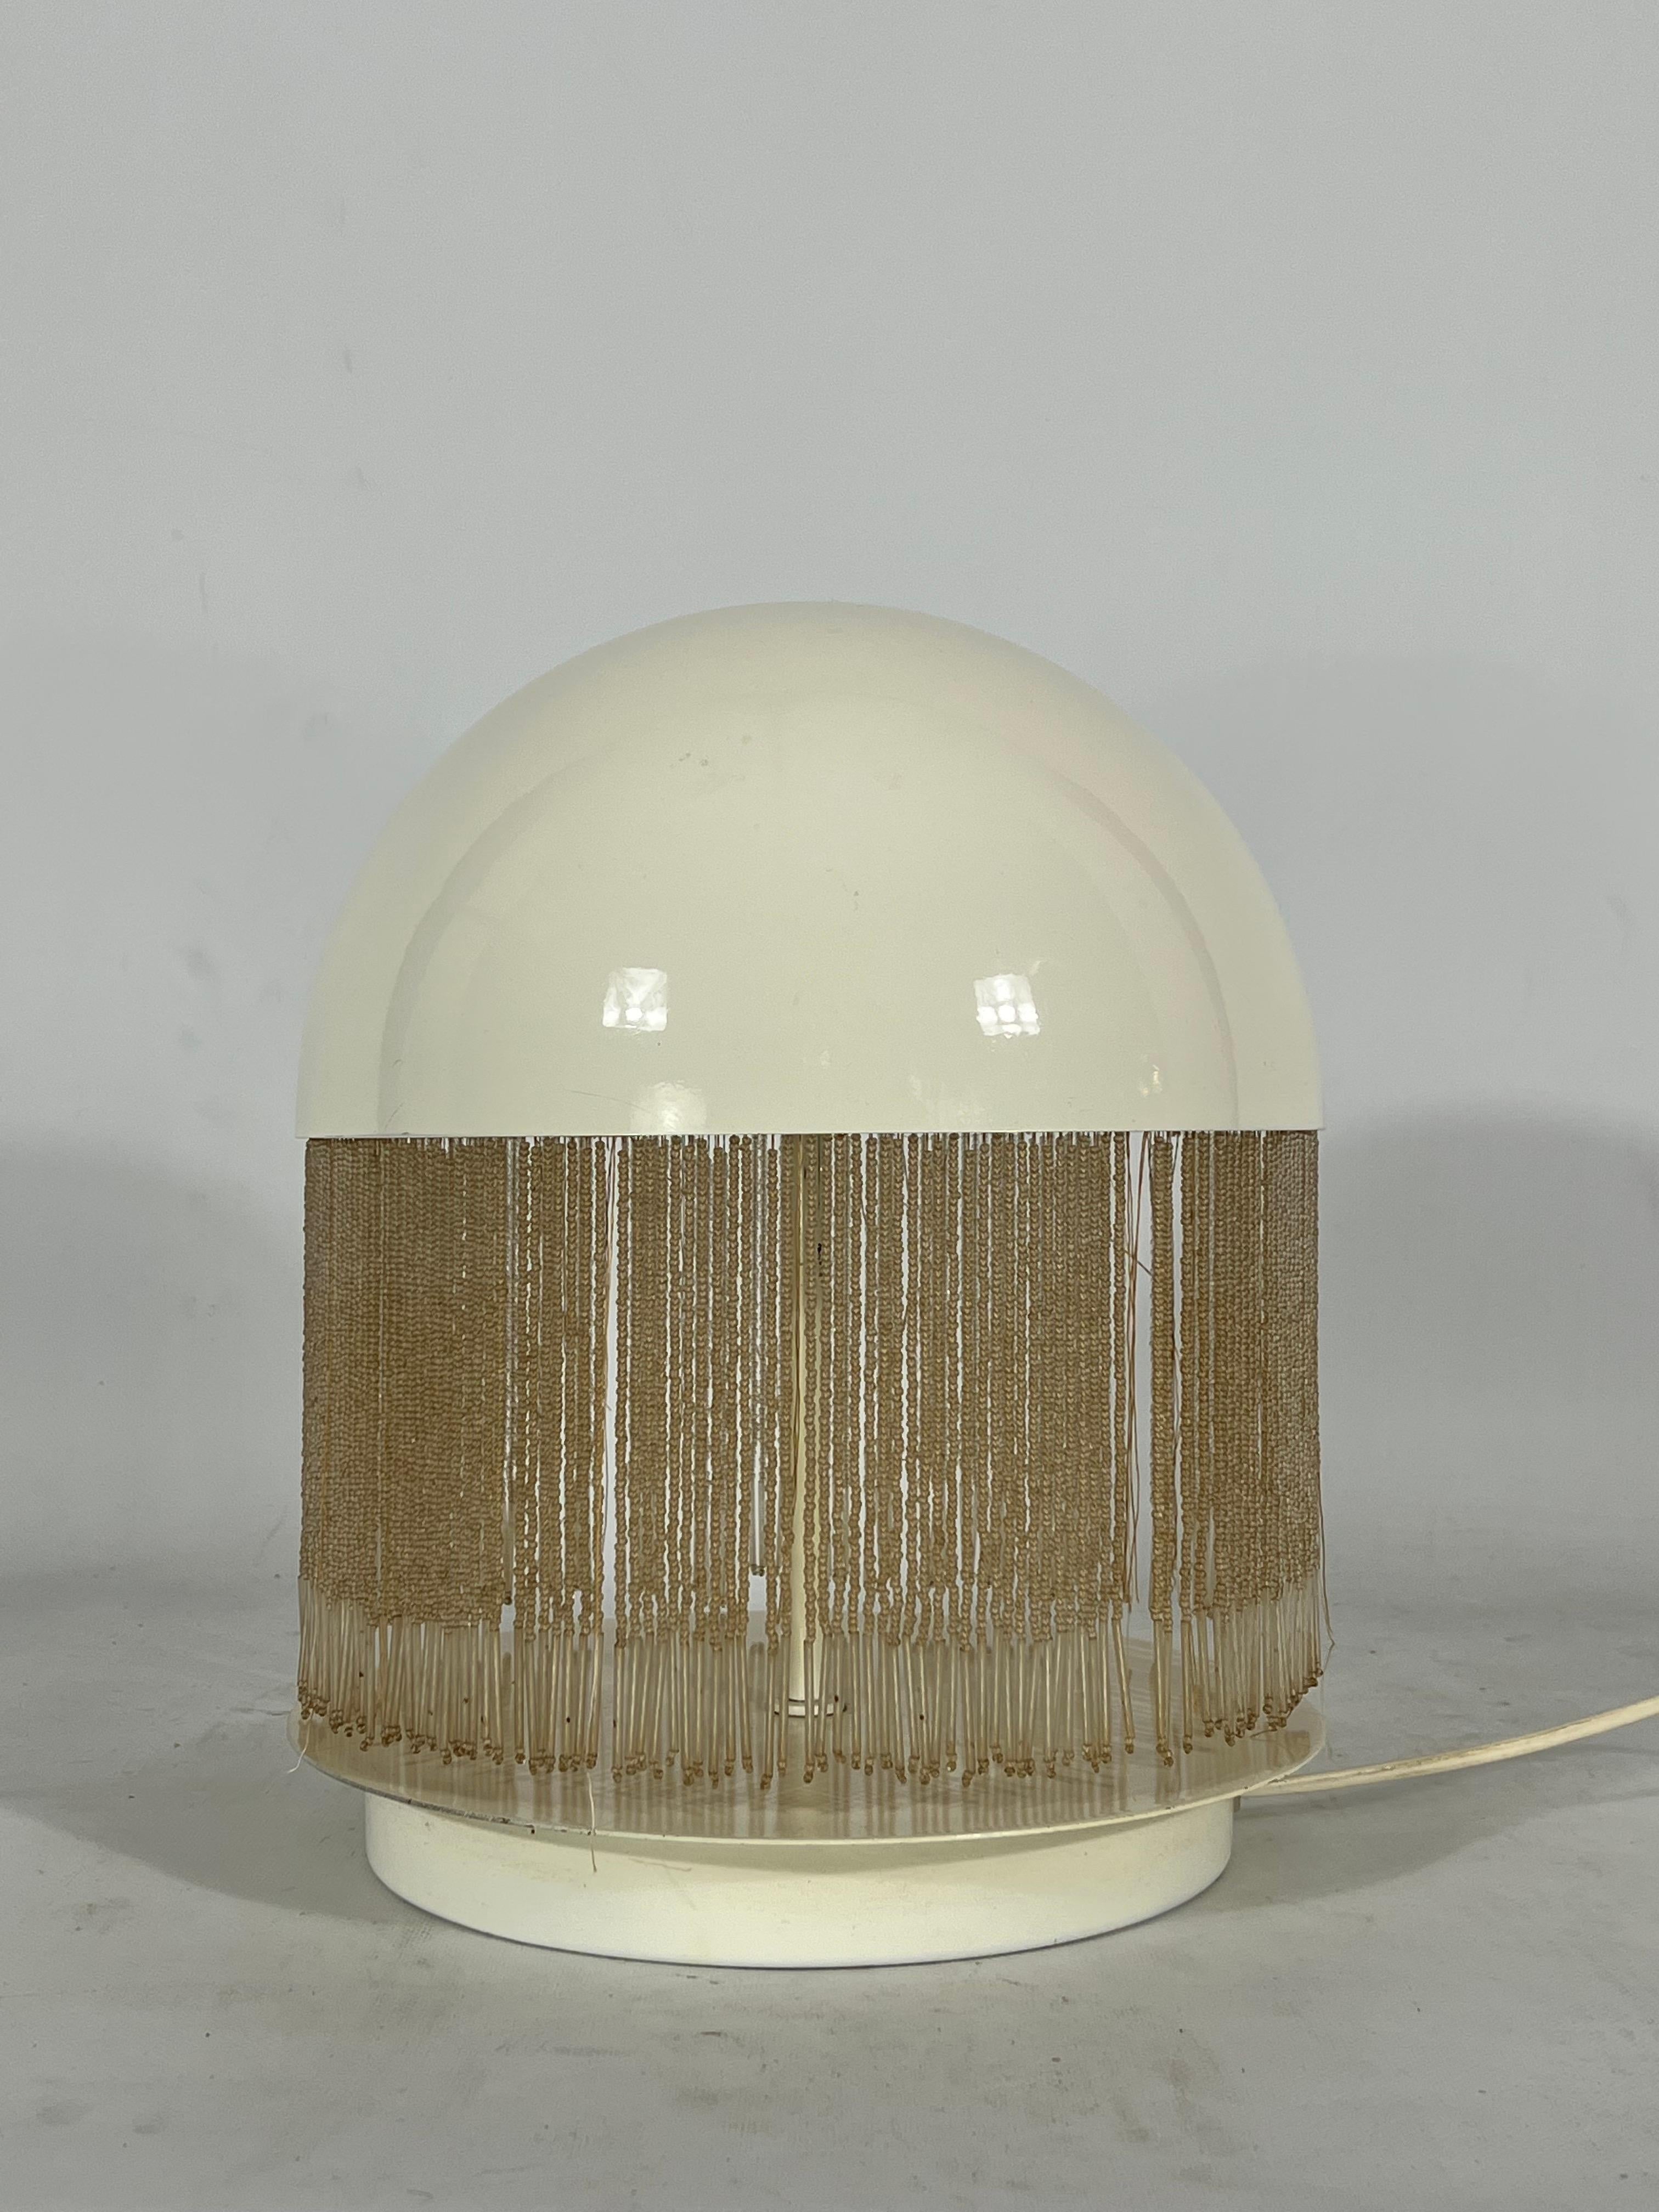 Rare Otero table lamp by Giuliana Gramigna for Quattrifolio. White painted metal structure and glass beads shade. Good vintage condition with trace of age and use. Some loss of beads. Full working with EU standard, adaptable on demand for USA